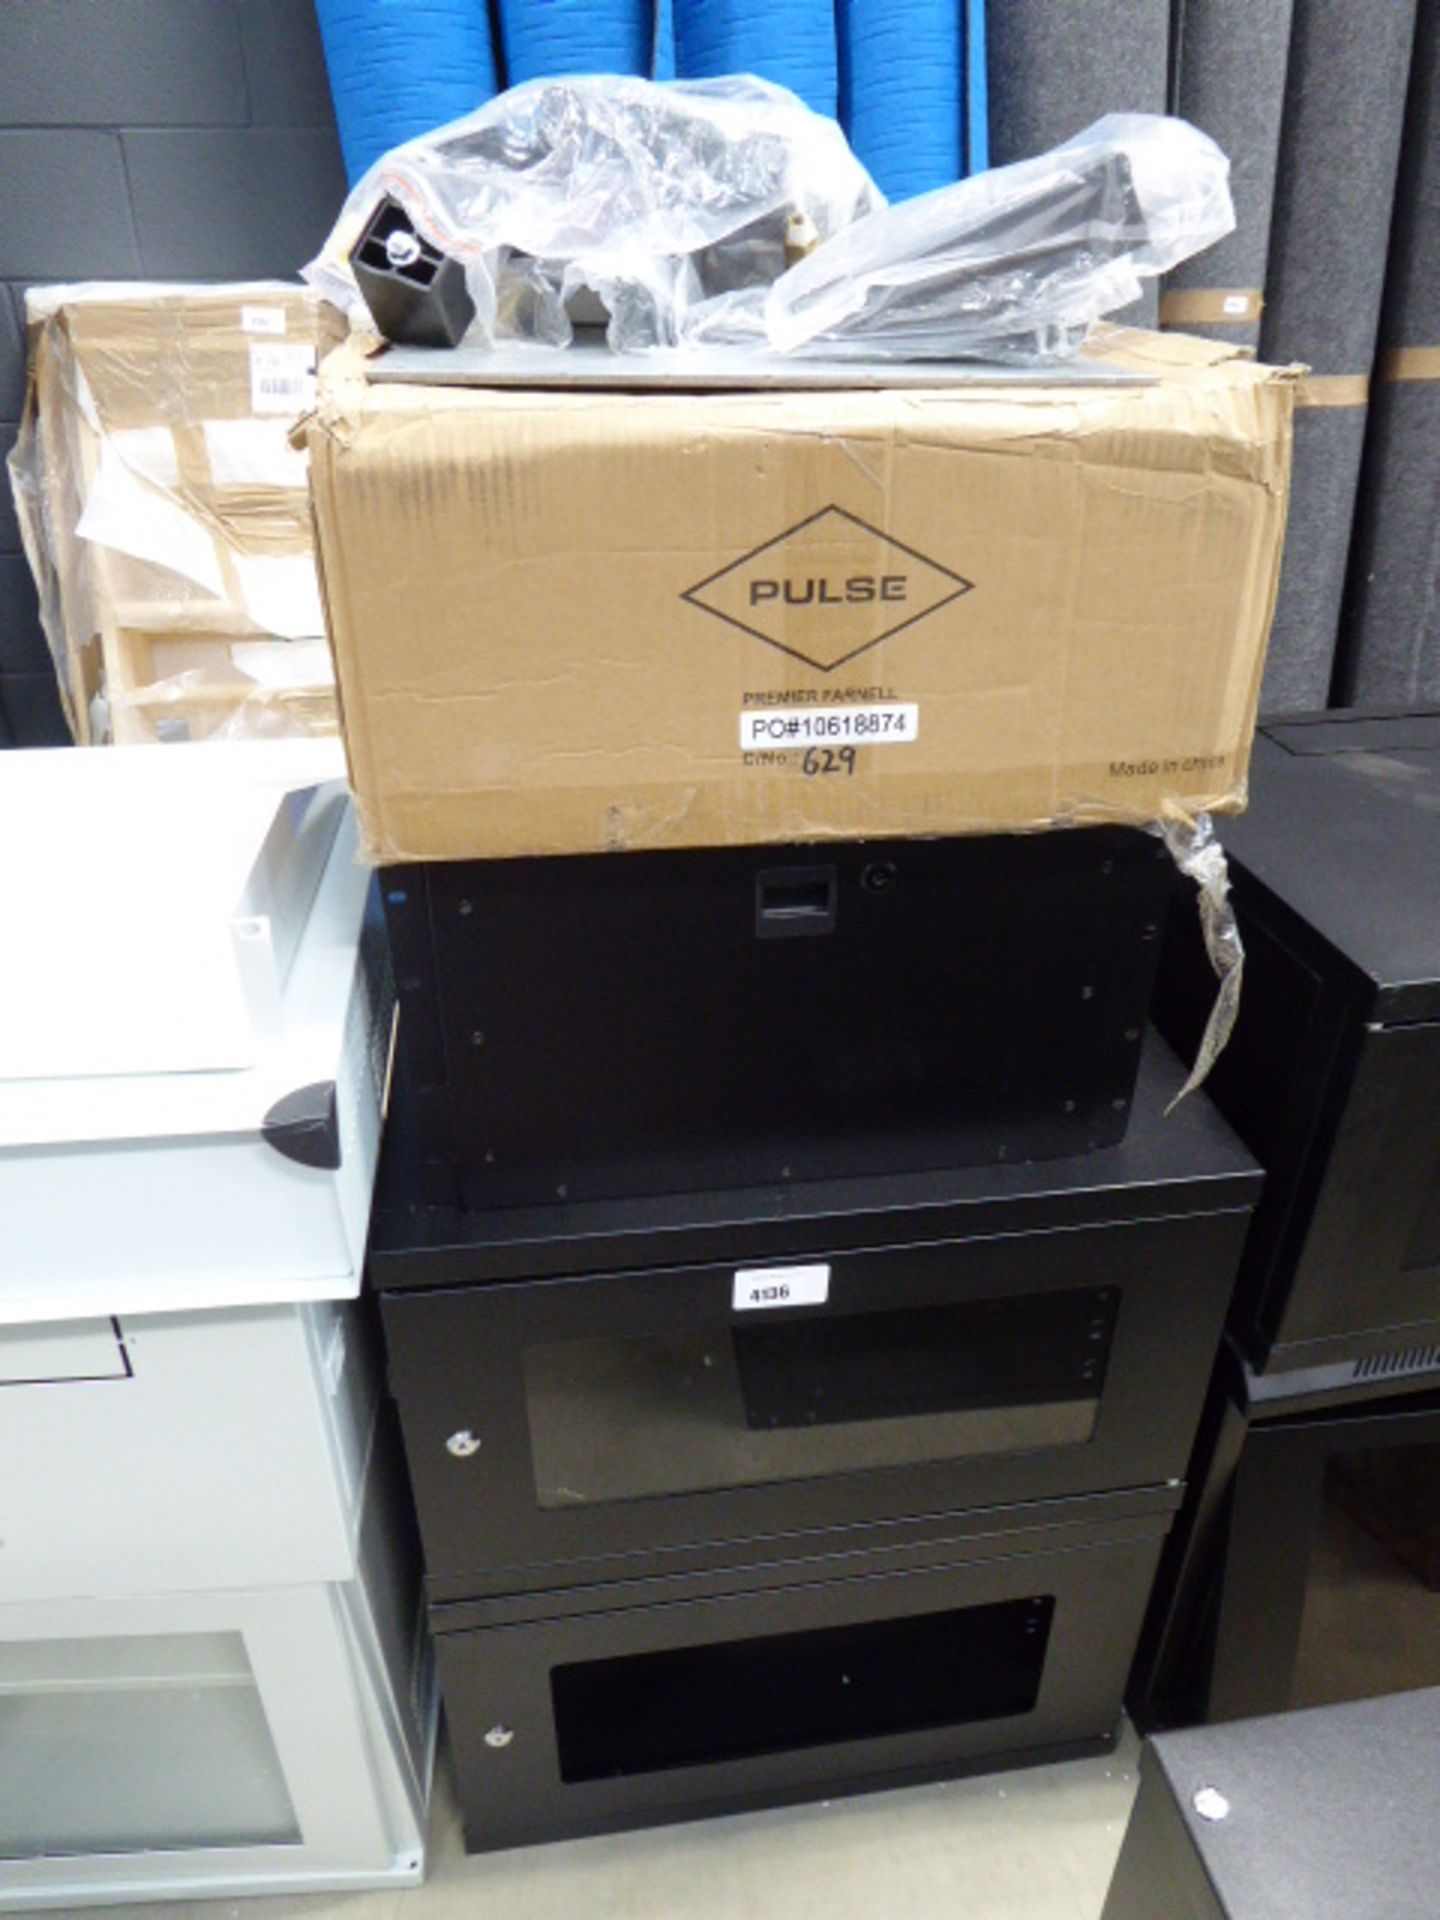 4139 - 2 small comms cabinets with a quantity of accessories